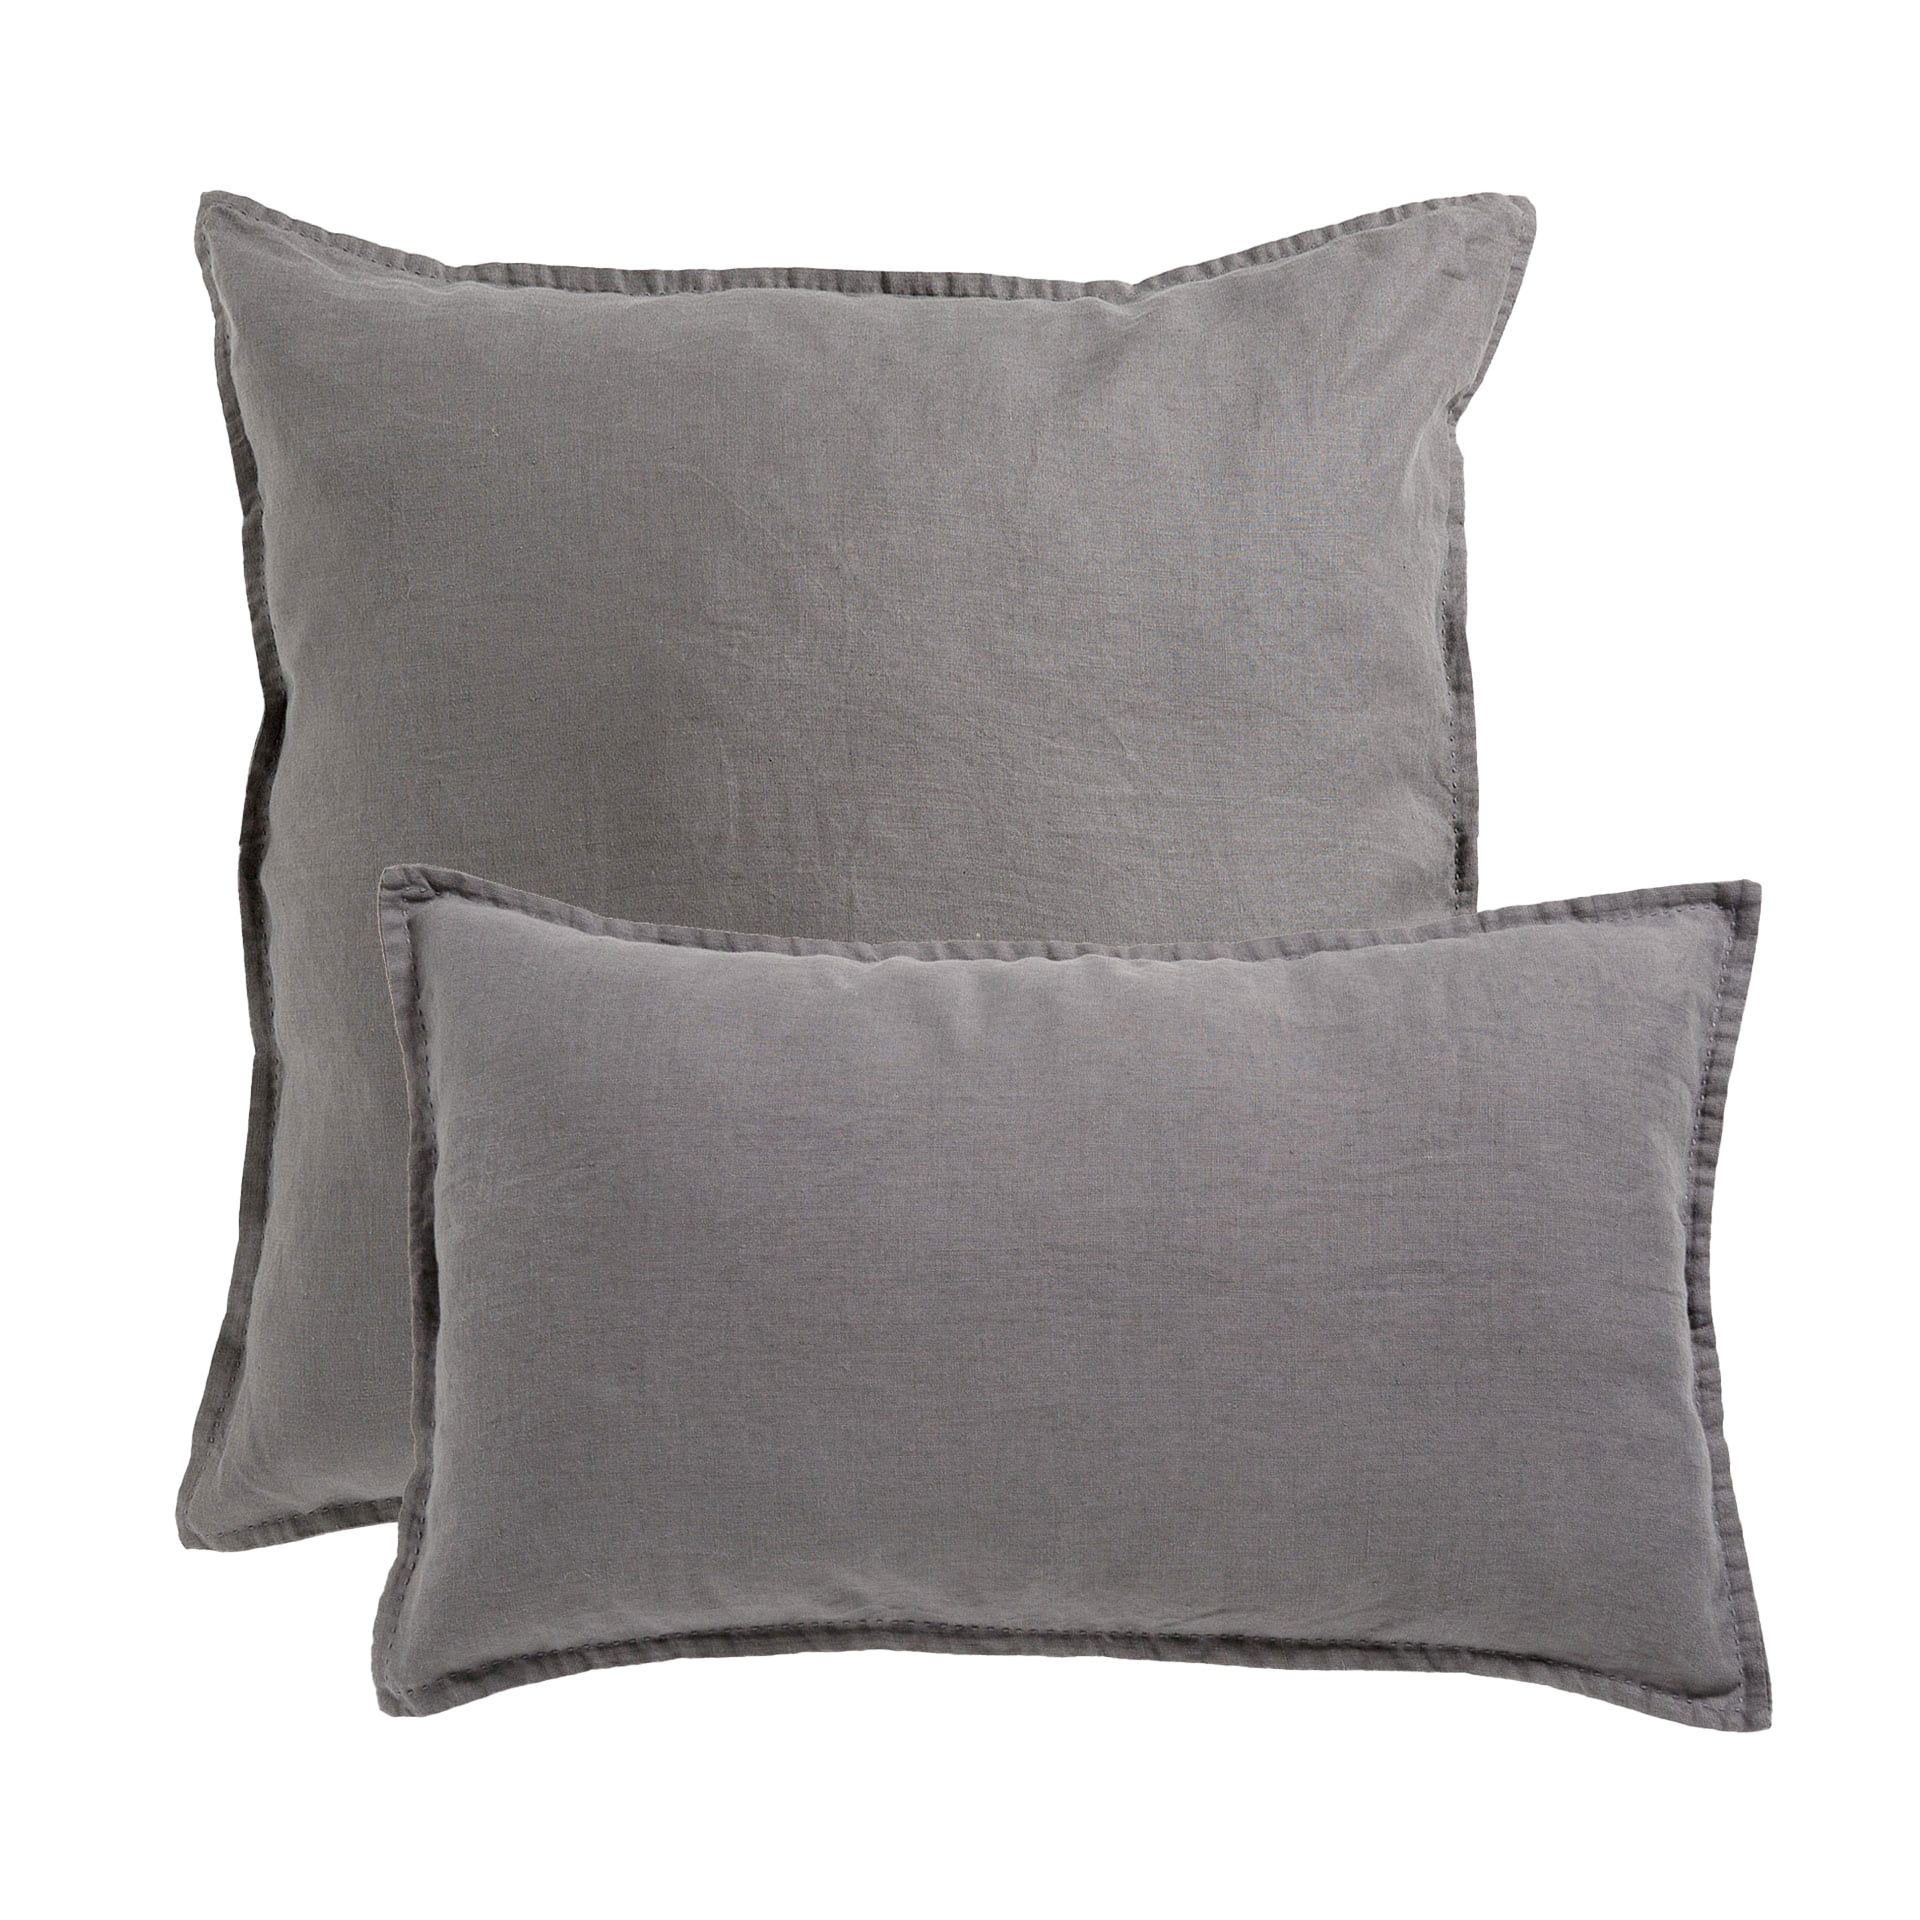 Cushion covers, from £3.99 Zara Home